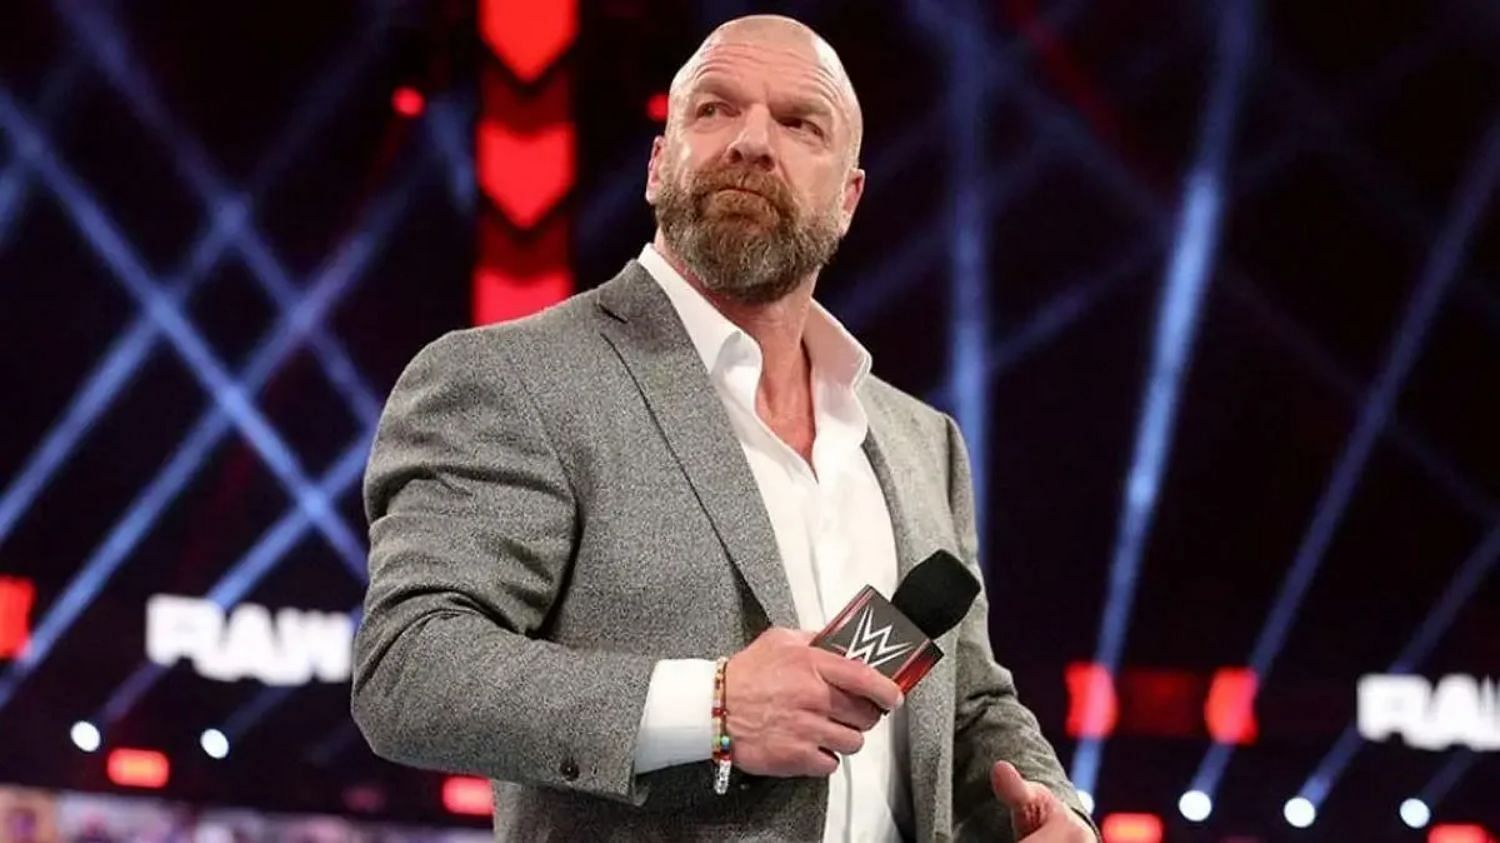 The WWE has undergone a smooth transition back to basics with Triple H in charge. Here are the mistakes he has to avoid with WWE